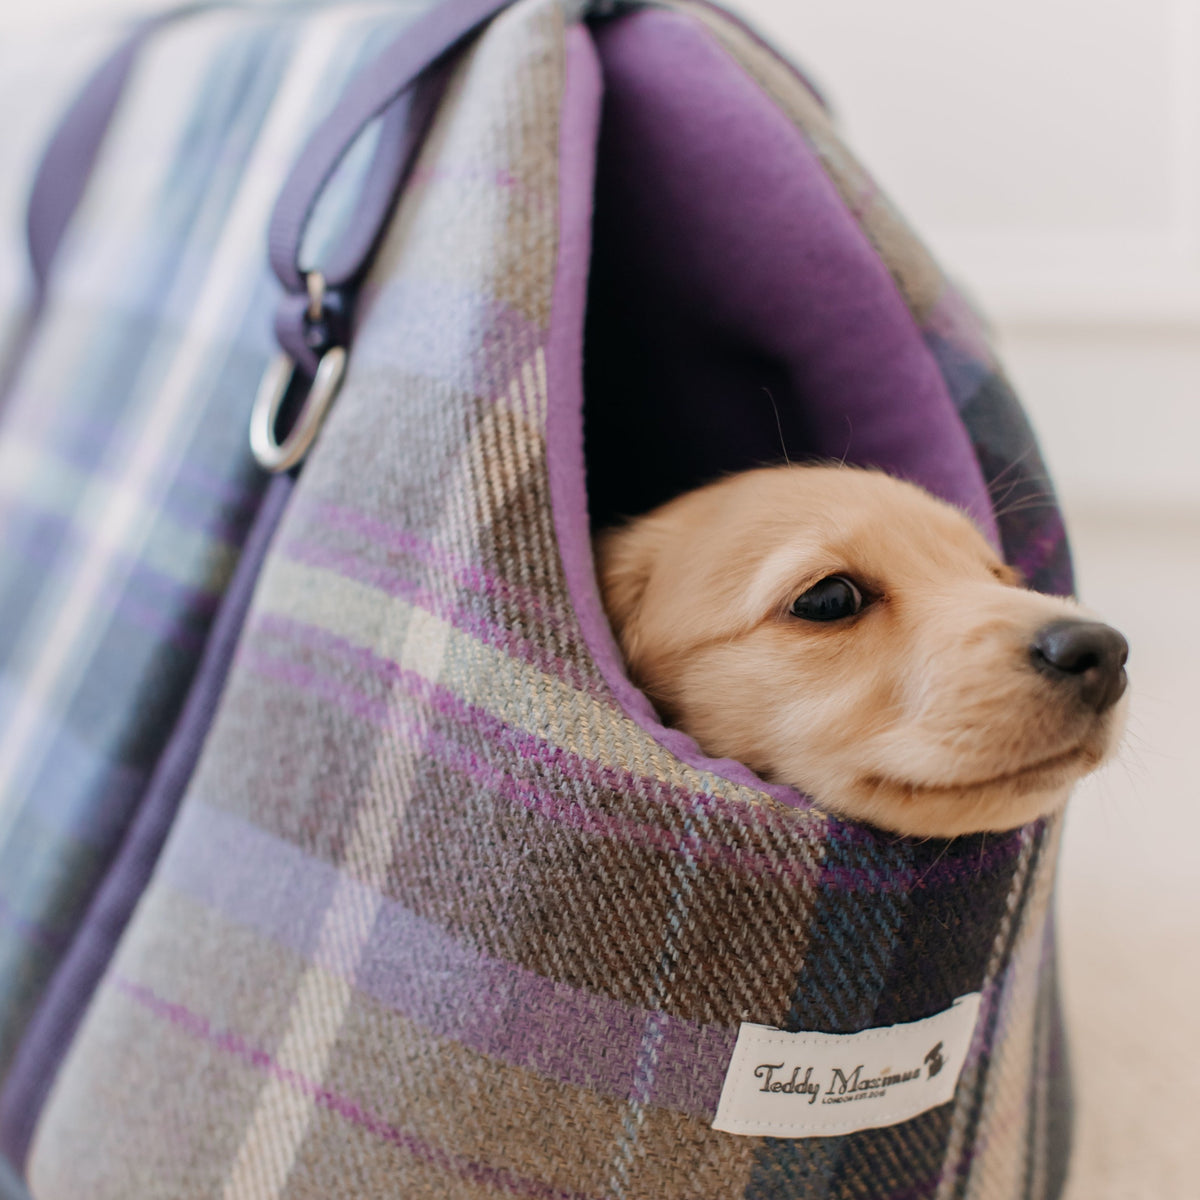 The Cambridge Adjustable Purple Taupe Soft Sided Luxury Dog Carrier